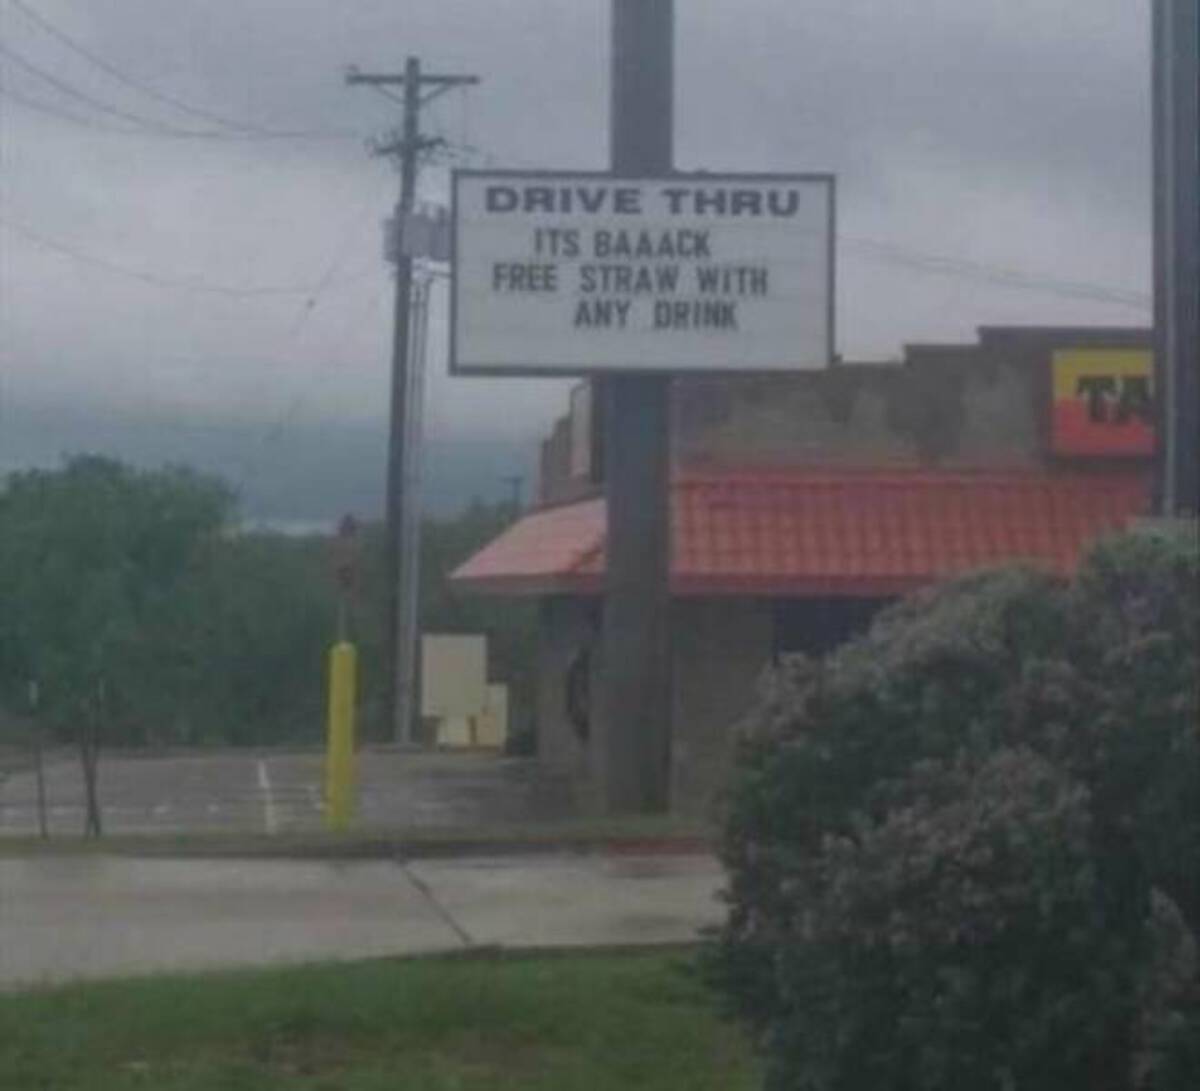 sign - Drive Thru Its Baaack Free Straw With Any Drink Ta